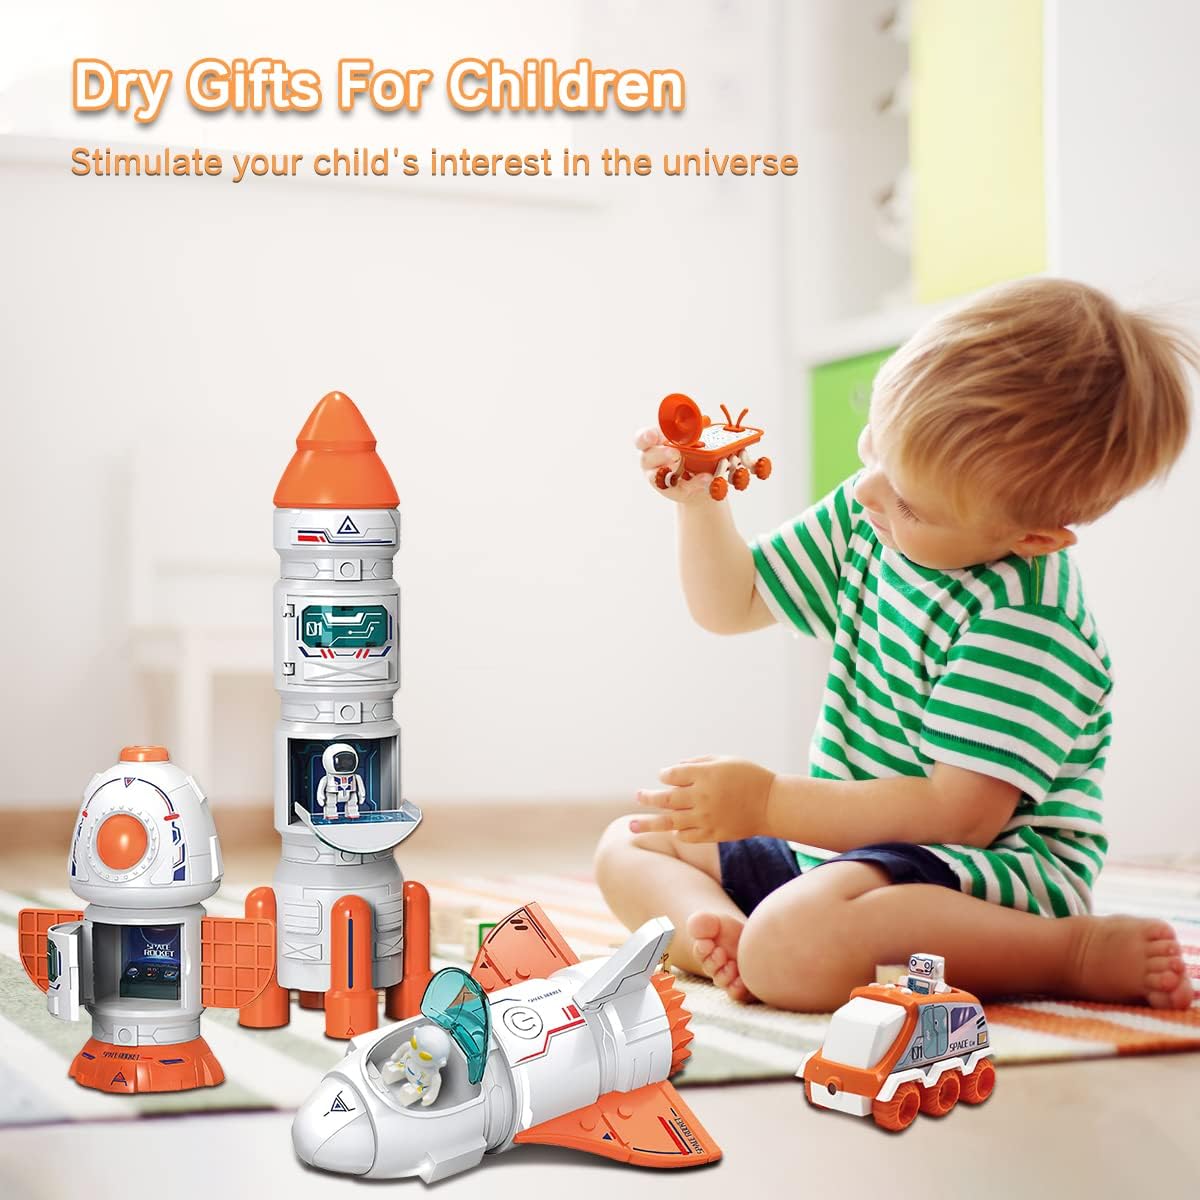 Aerospace Model Space Figure Toys with Sound & Lights